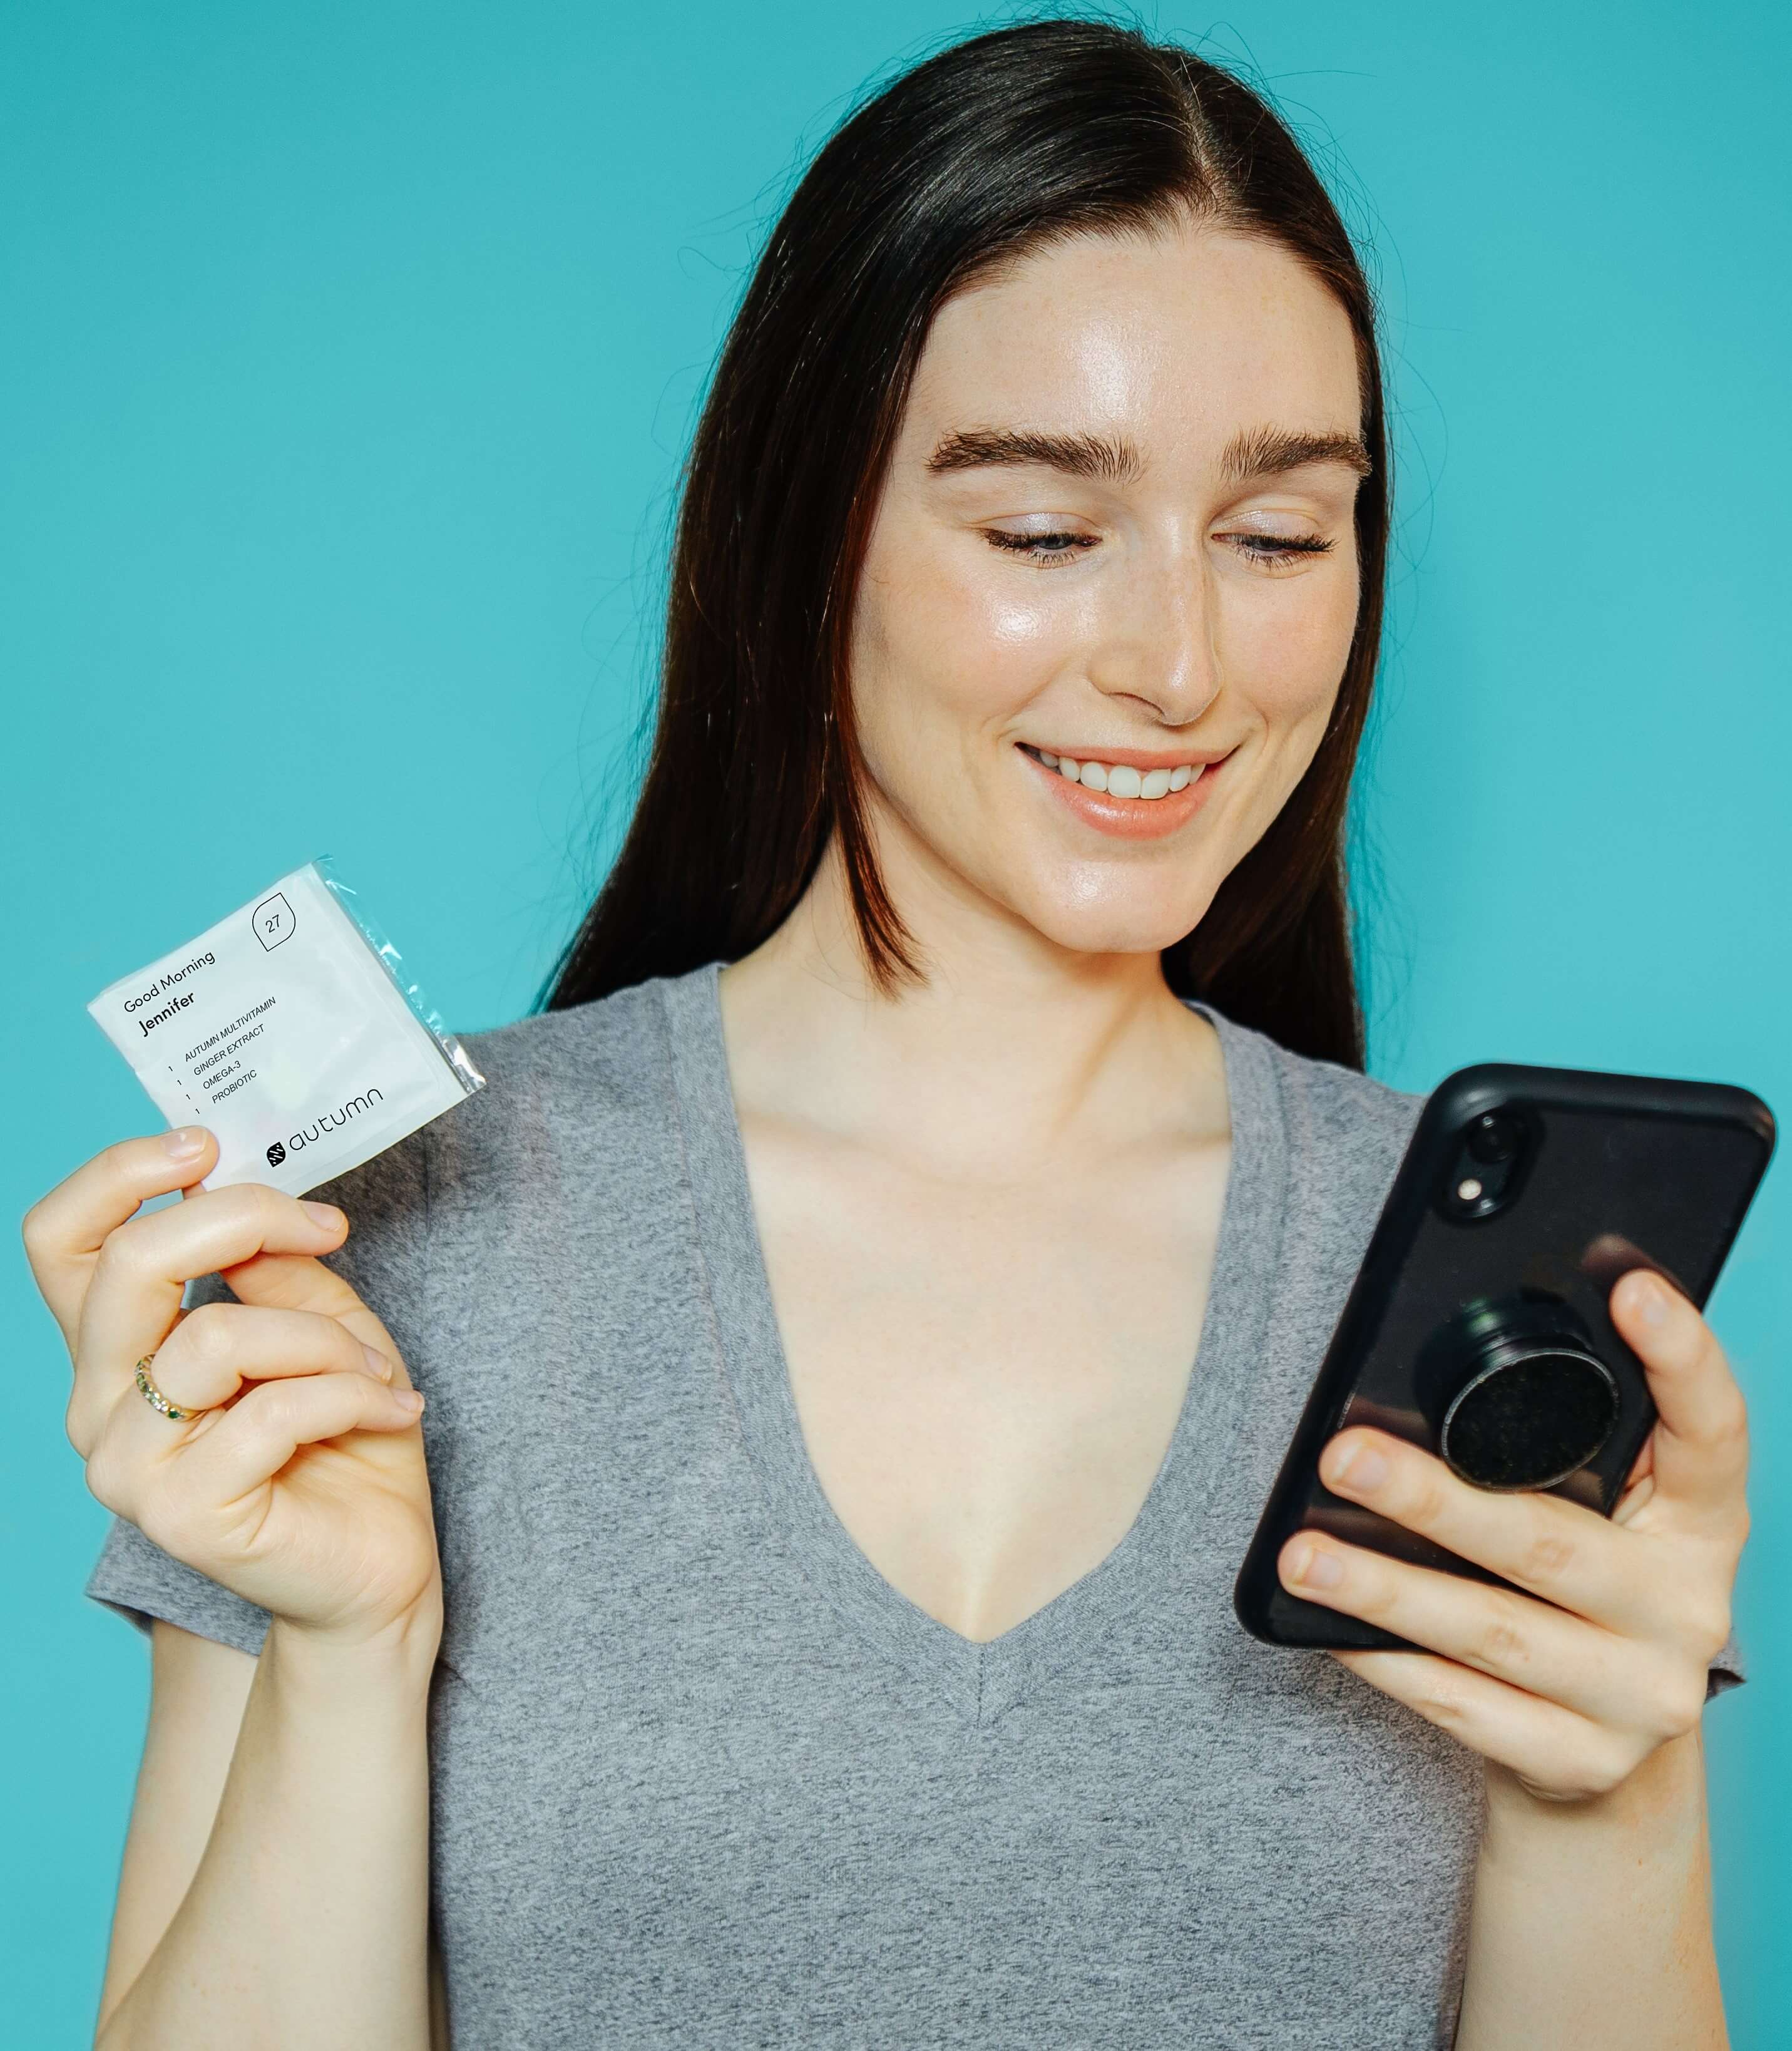 Woman looking at her phone while holding an Autumn DNA customized vitamin packet